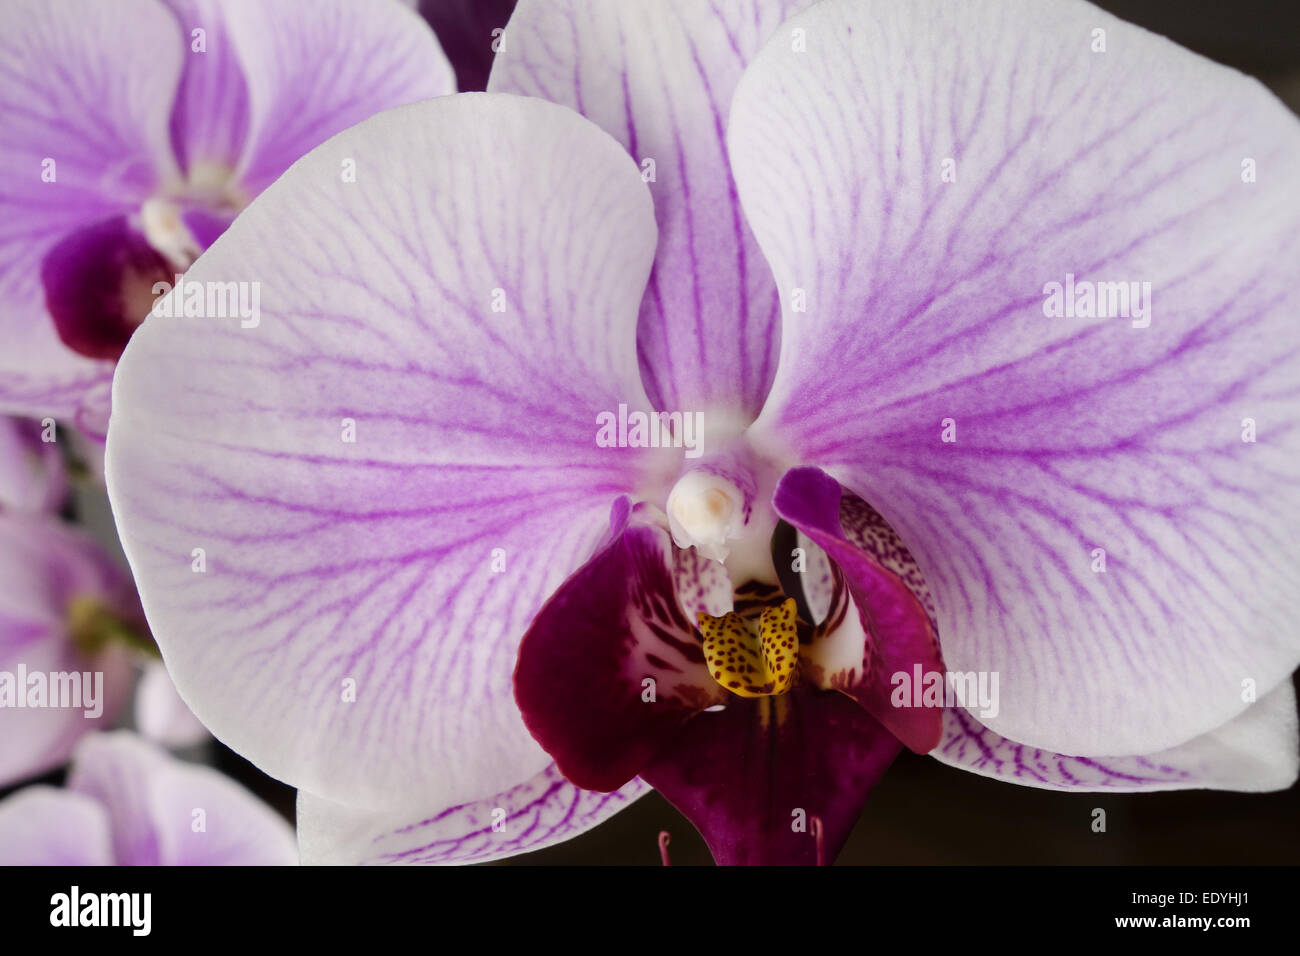 Blühende Orchidee, Blooming Orchid, Orchid, Orchids, Bloom, Blooming, Blossom, Flower, Pistil, Flowers, Floral, Botany, Detail, Stock Photo